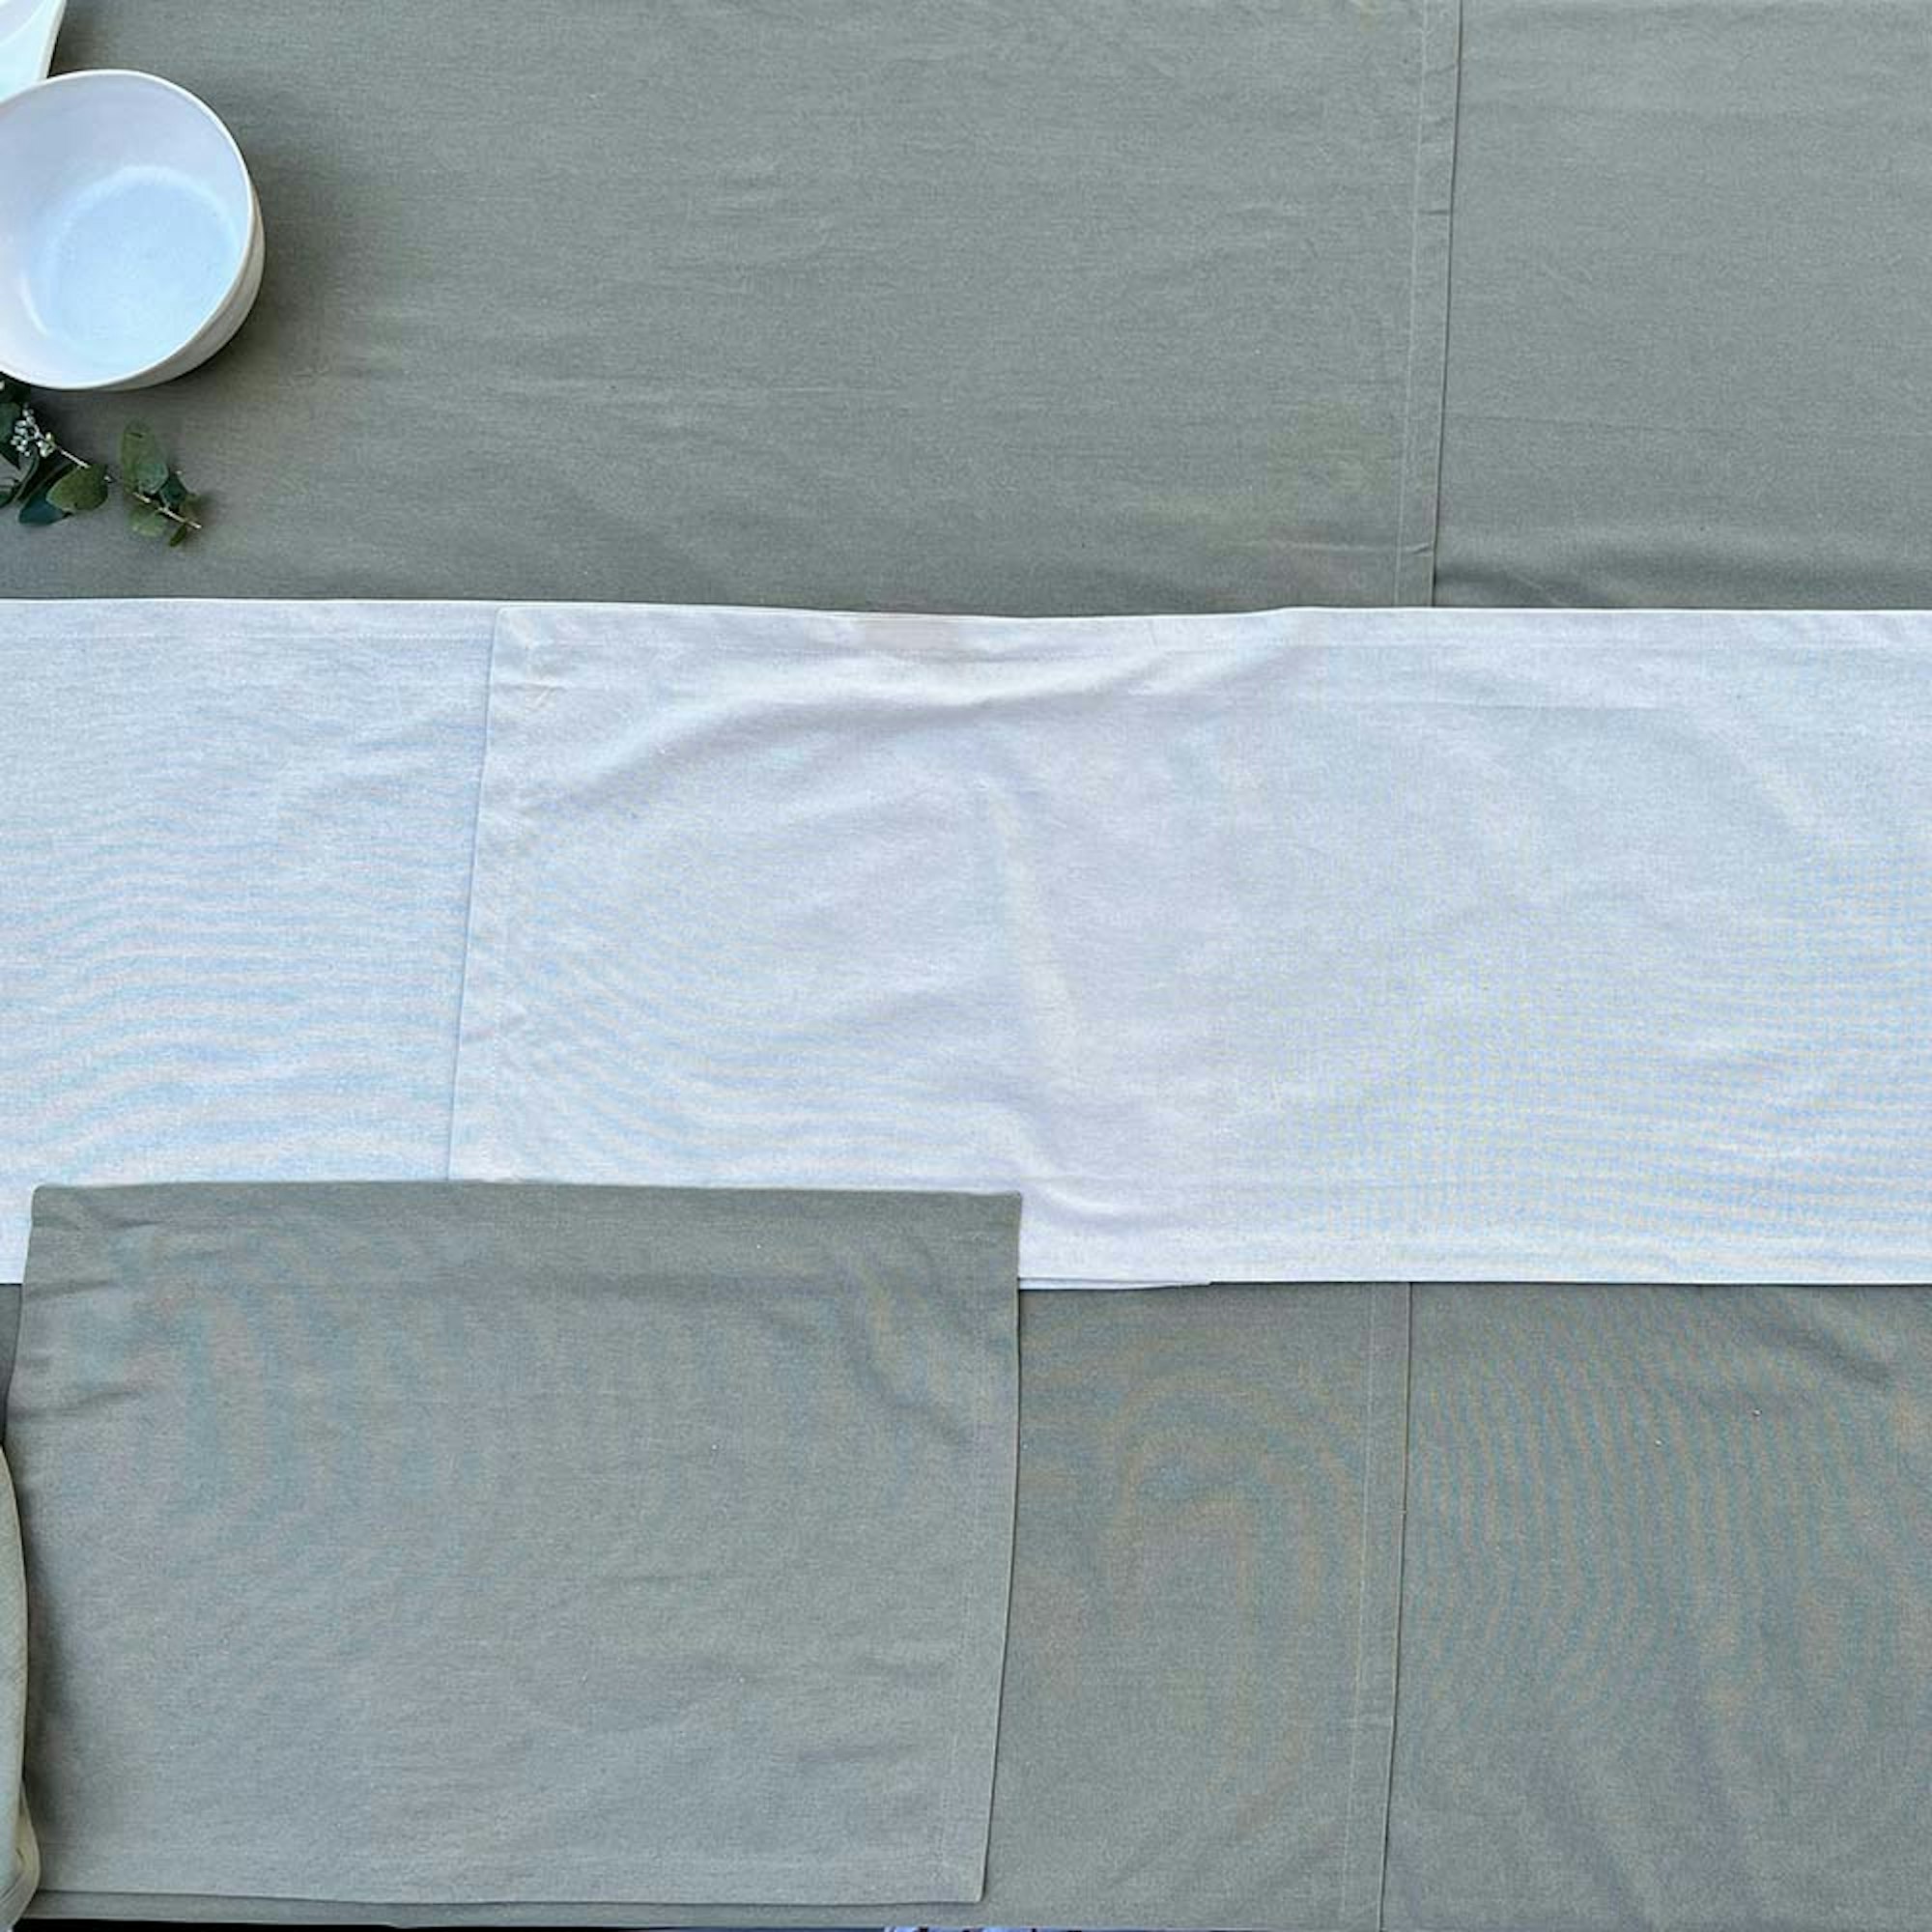 How to style a dining table for a dinner party. Step 3 select a placemat. Empty table with table cloth, runner and placemat.